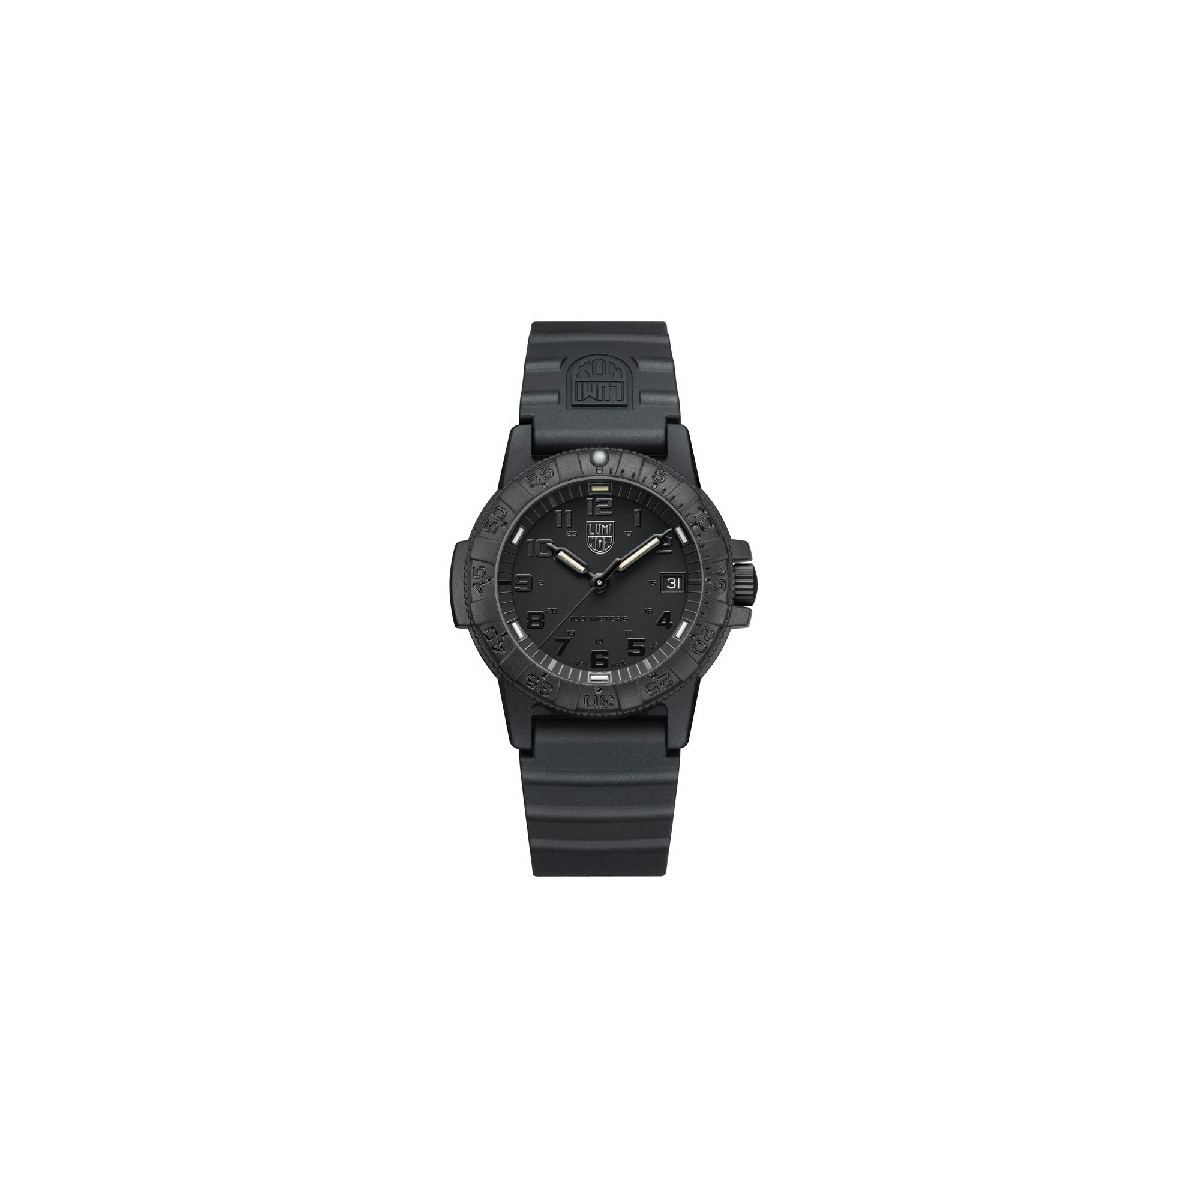 NAVY SEAL SEA TURTLE BLACK OUT - 0301BO